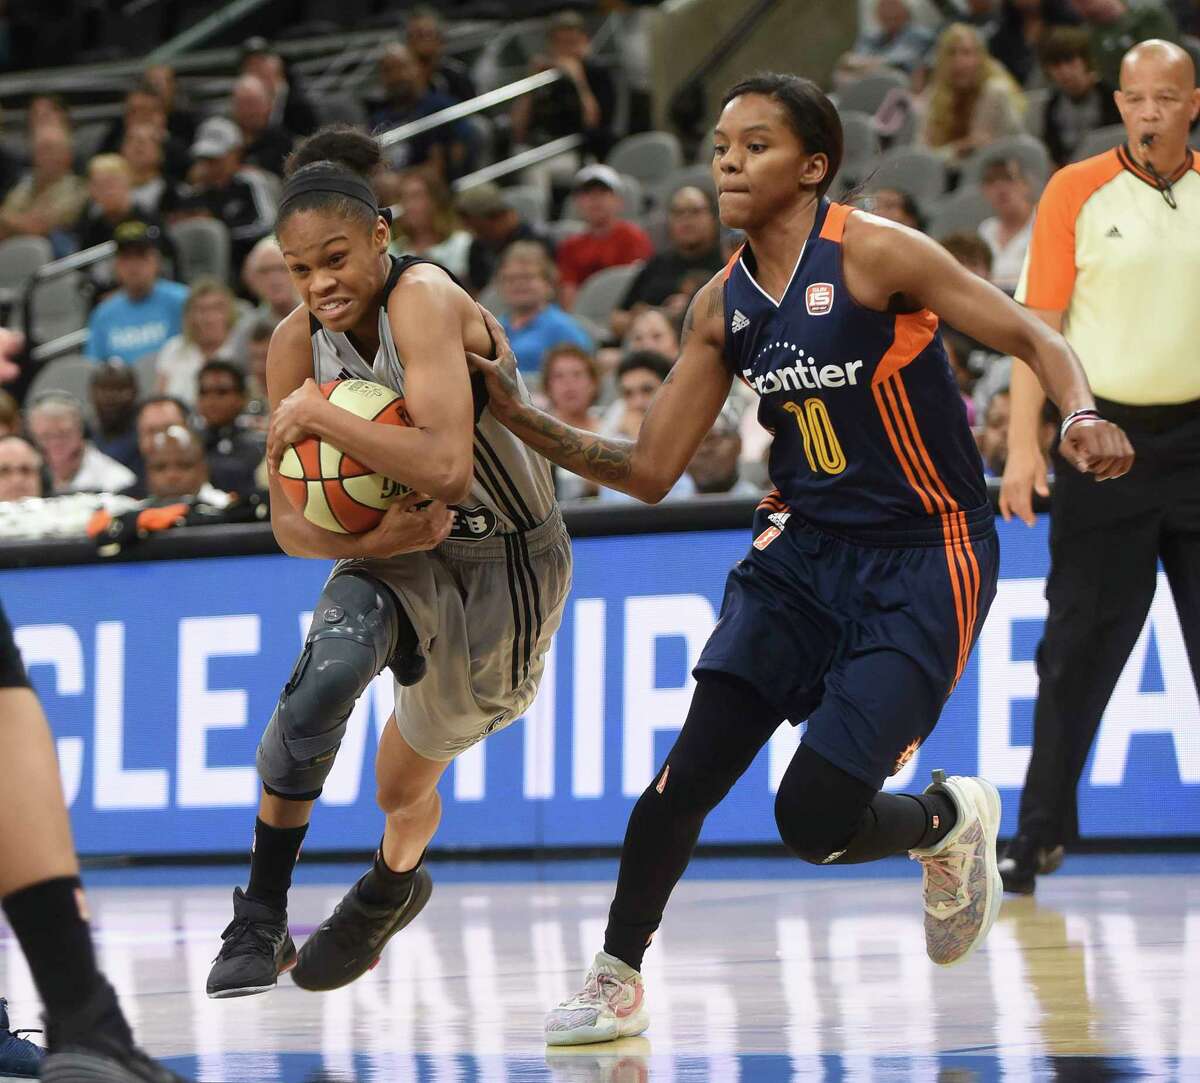 Moriah Jefferson of the San Antonio Stars protects the ball as she drives into the lane during WNBA action against the Connecticut Sun at the AT&T Center on Wednesday, July 5, 2017. Courtney Williams of the Sun gives chase.